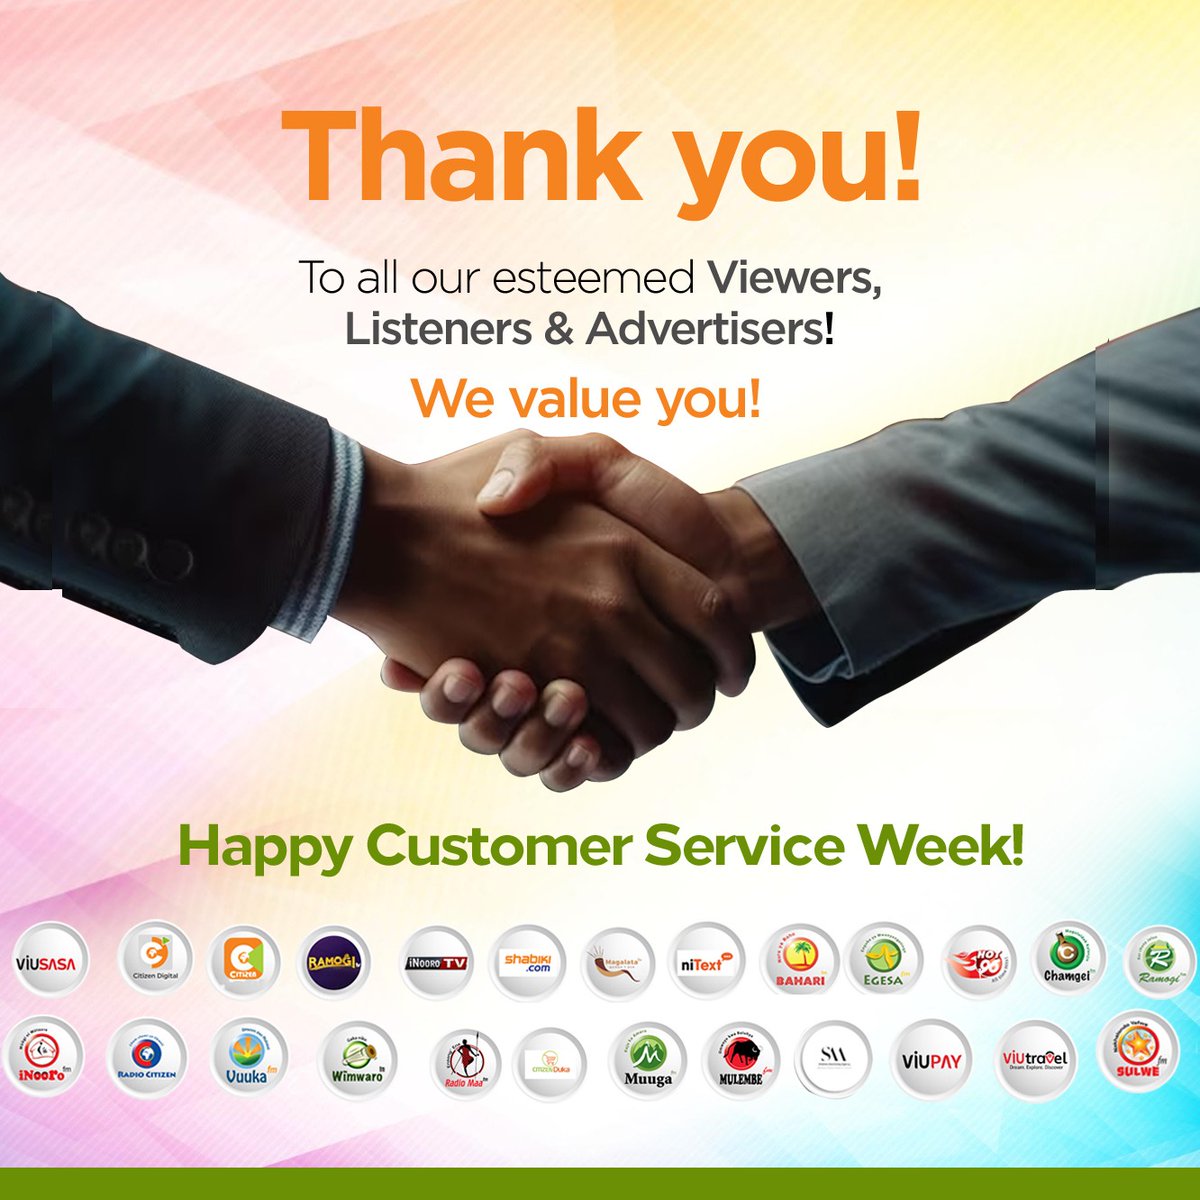 A special shout-out to our audience, listeners and customers! We are because you are! Happy Customer Service Week!
#customerserviceweek